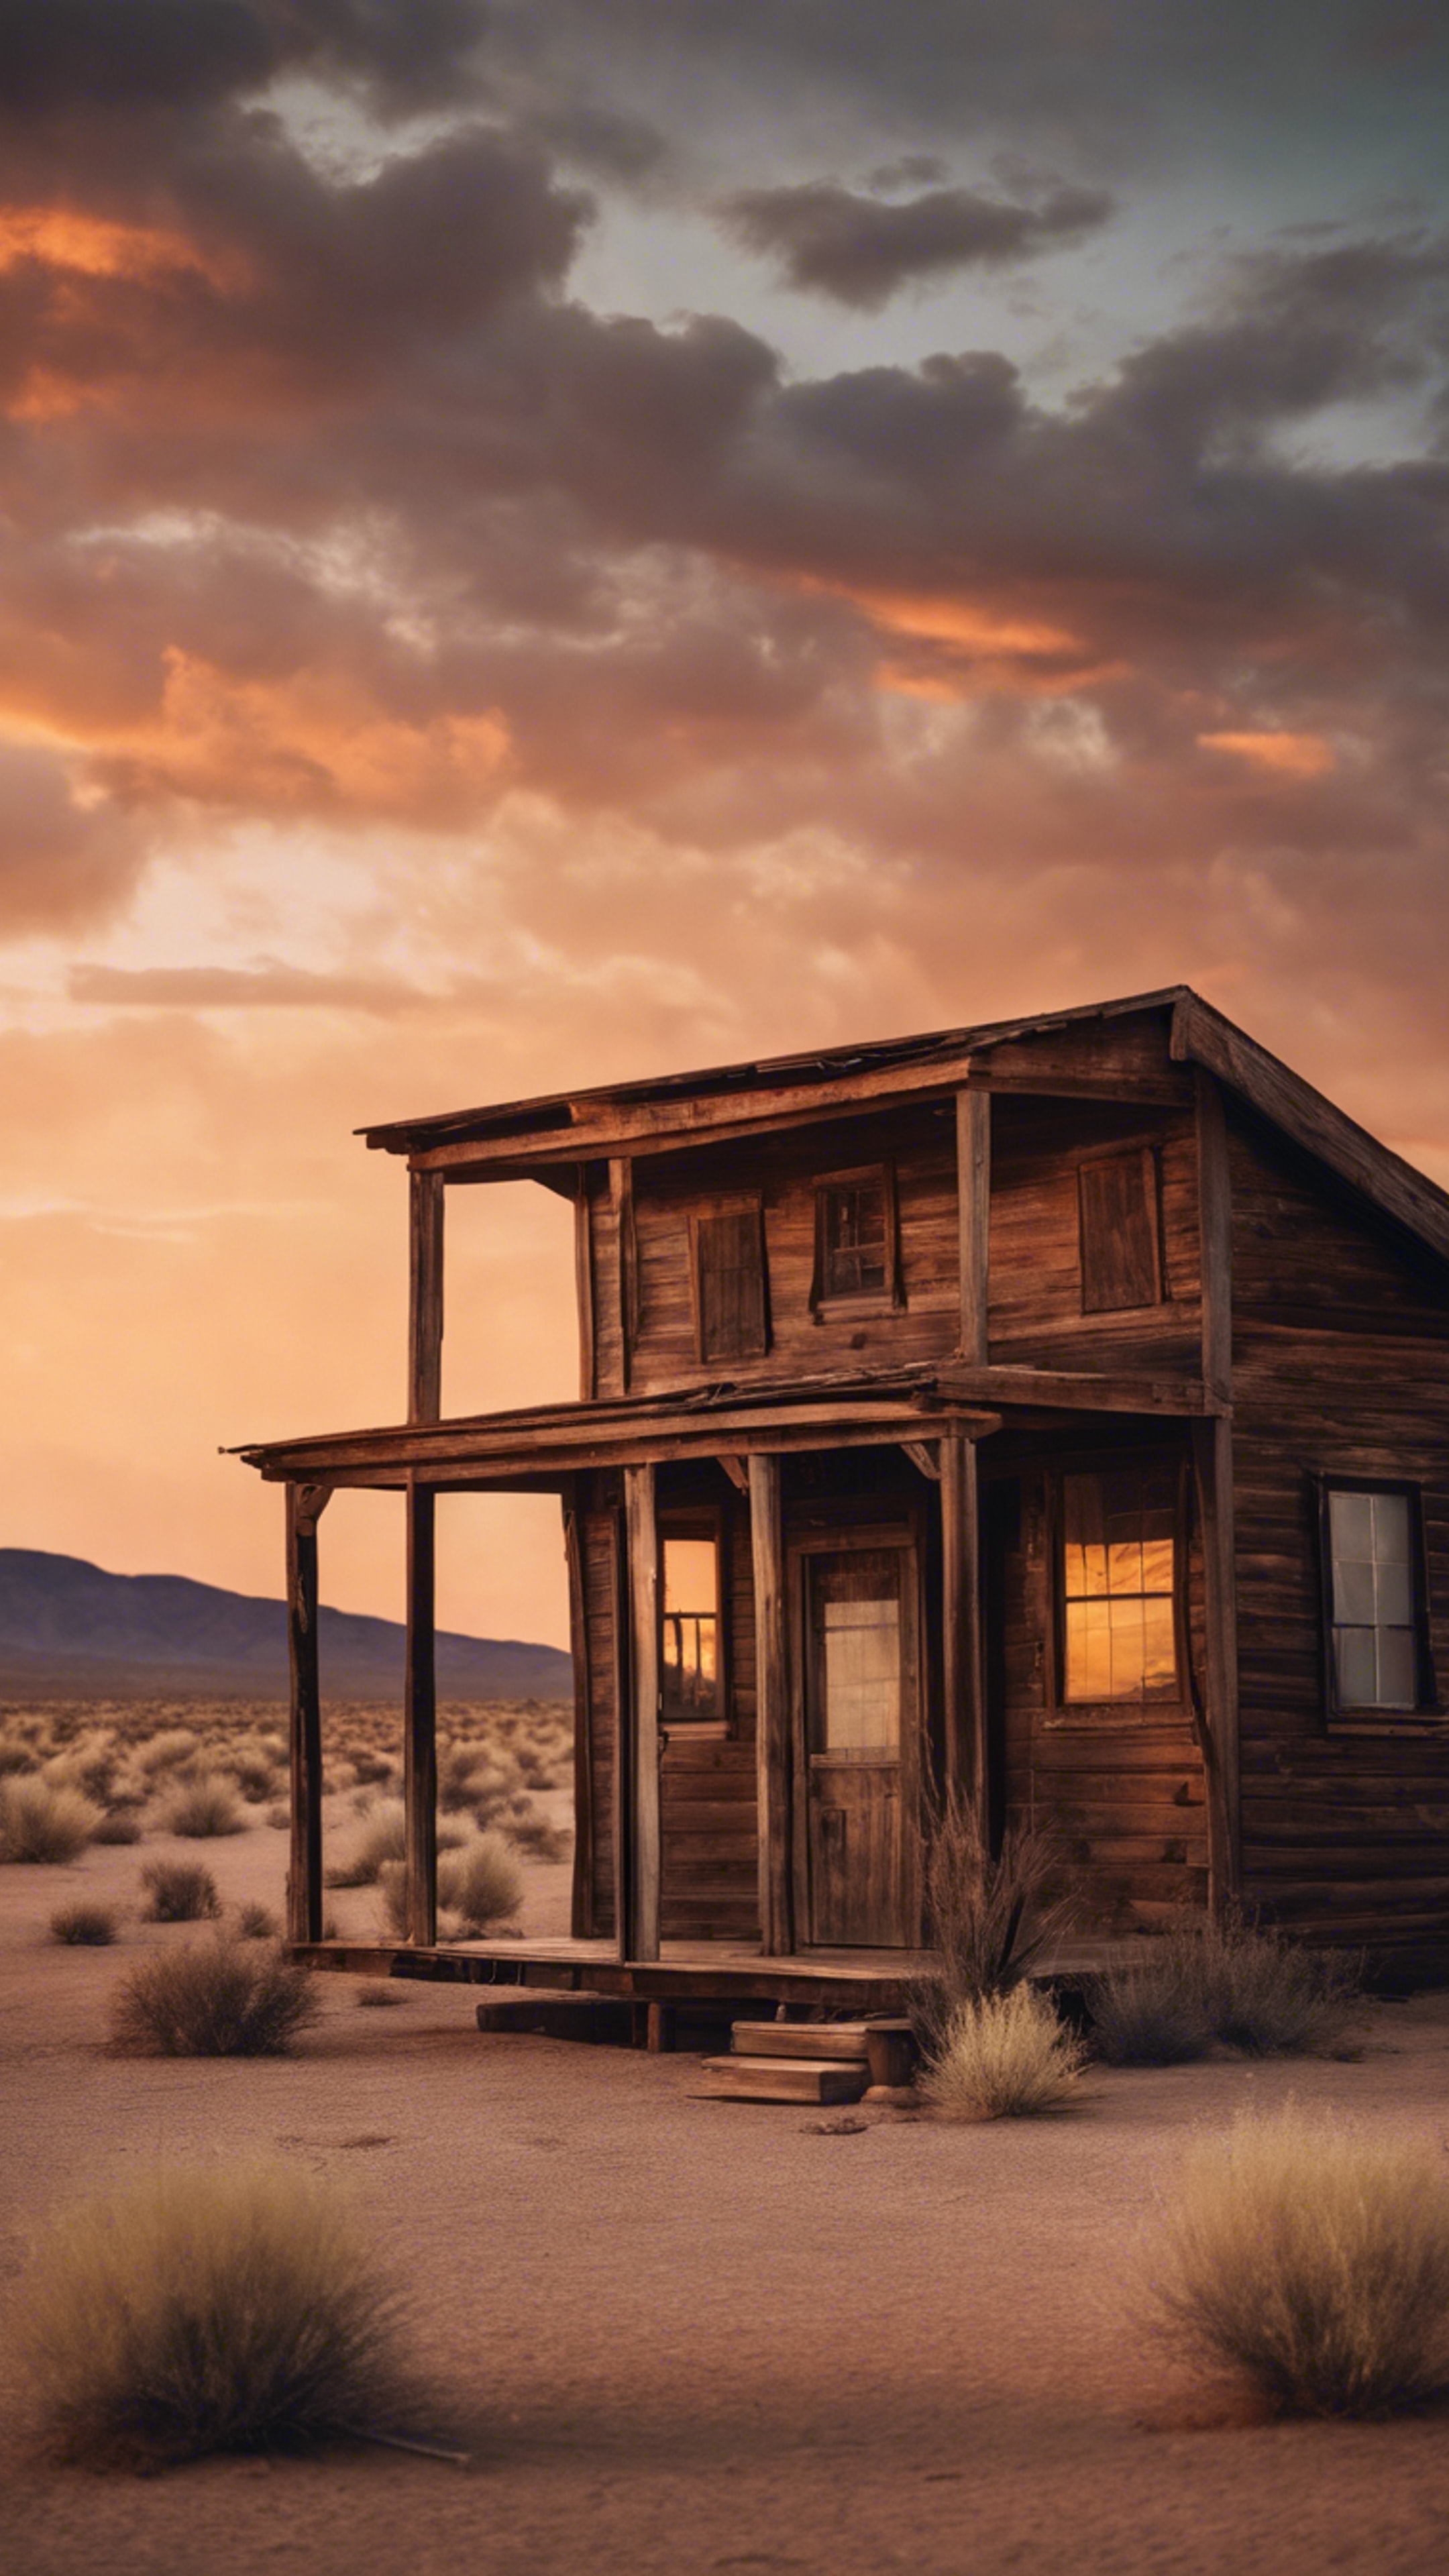 A dust-swept desert scene with a lone cabin standing resiliently during a blazing sunset in the wild west. Tapeta[55ae6b4a2ff440e59218]